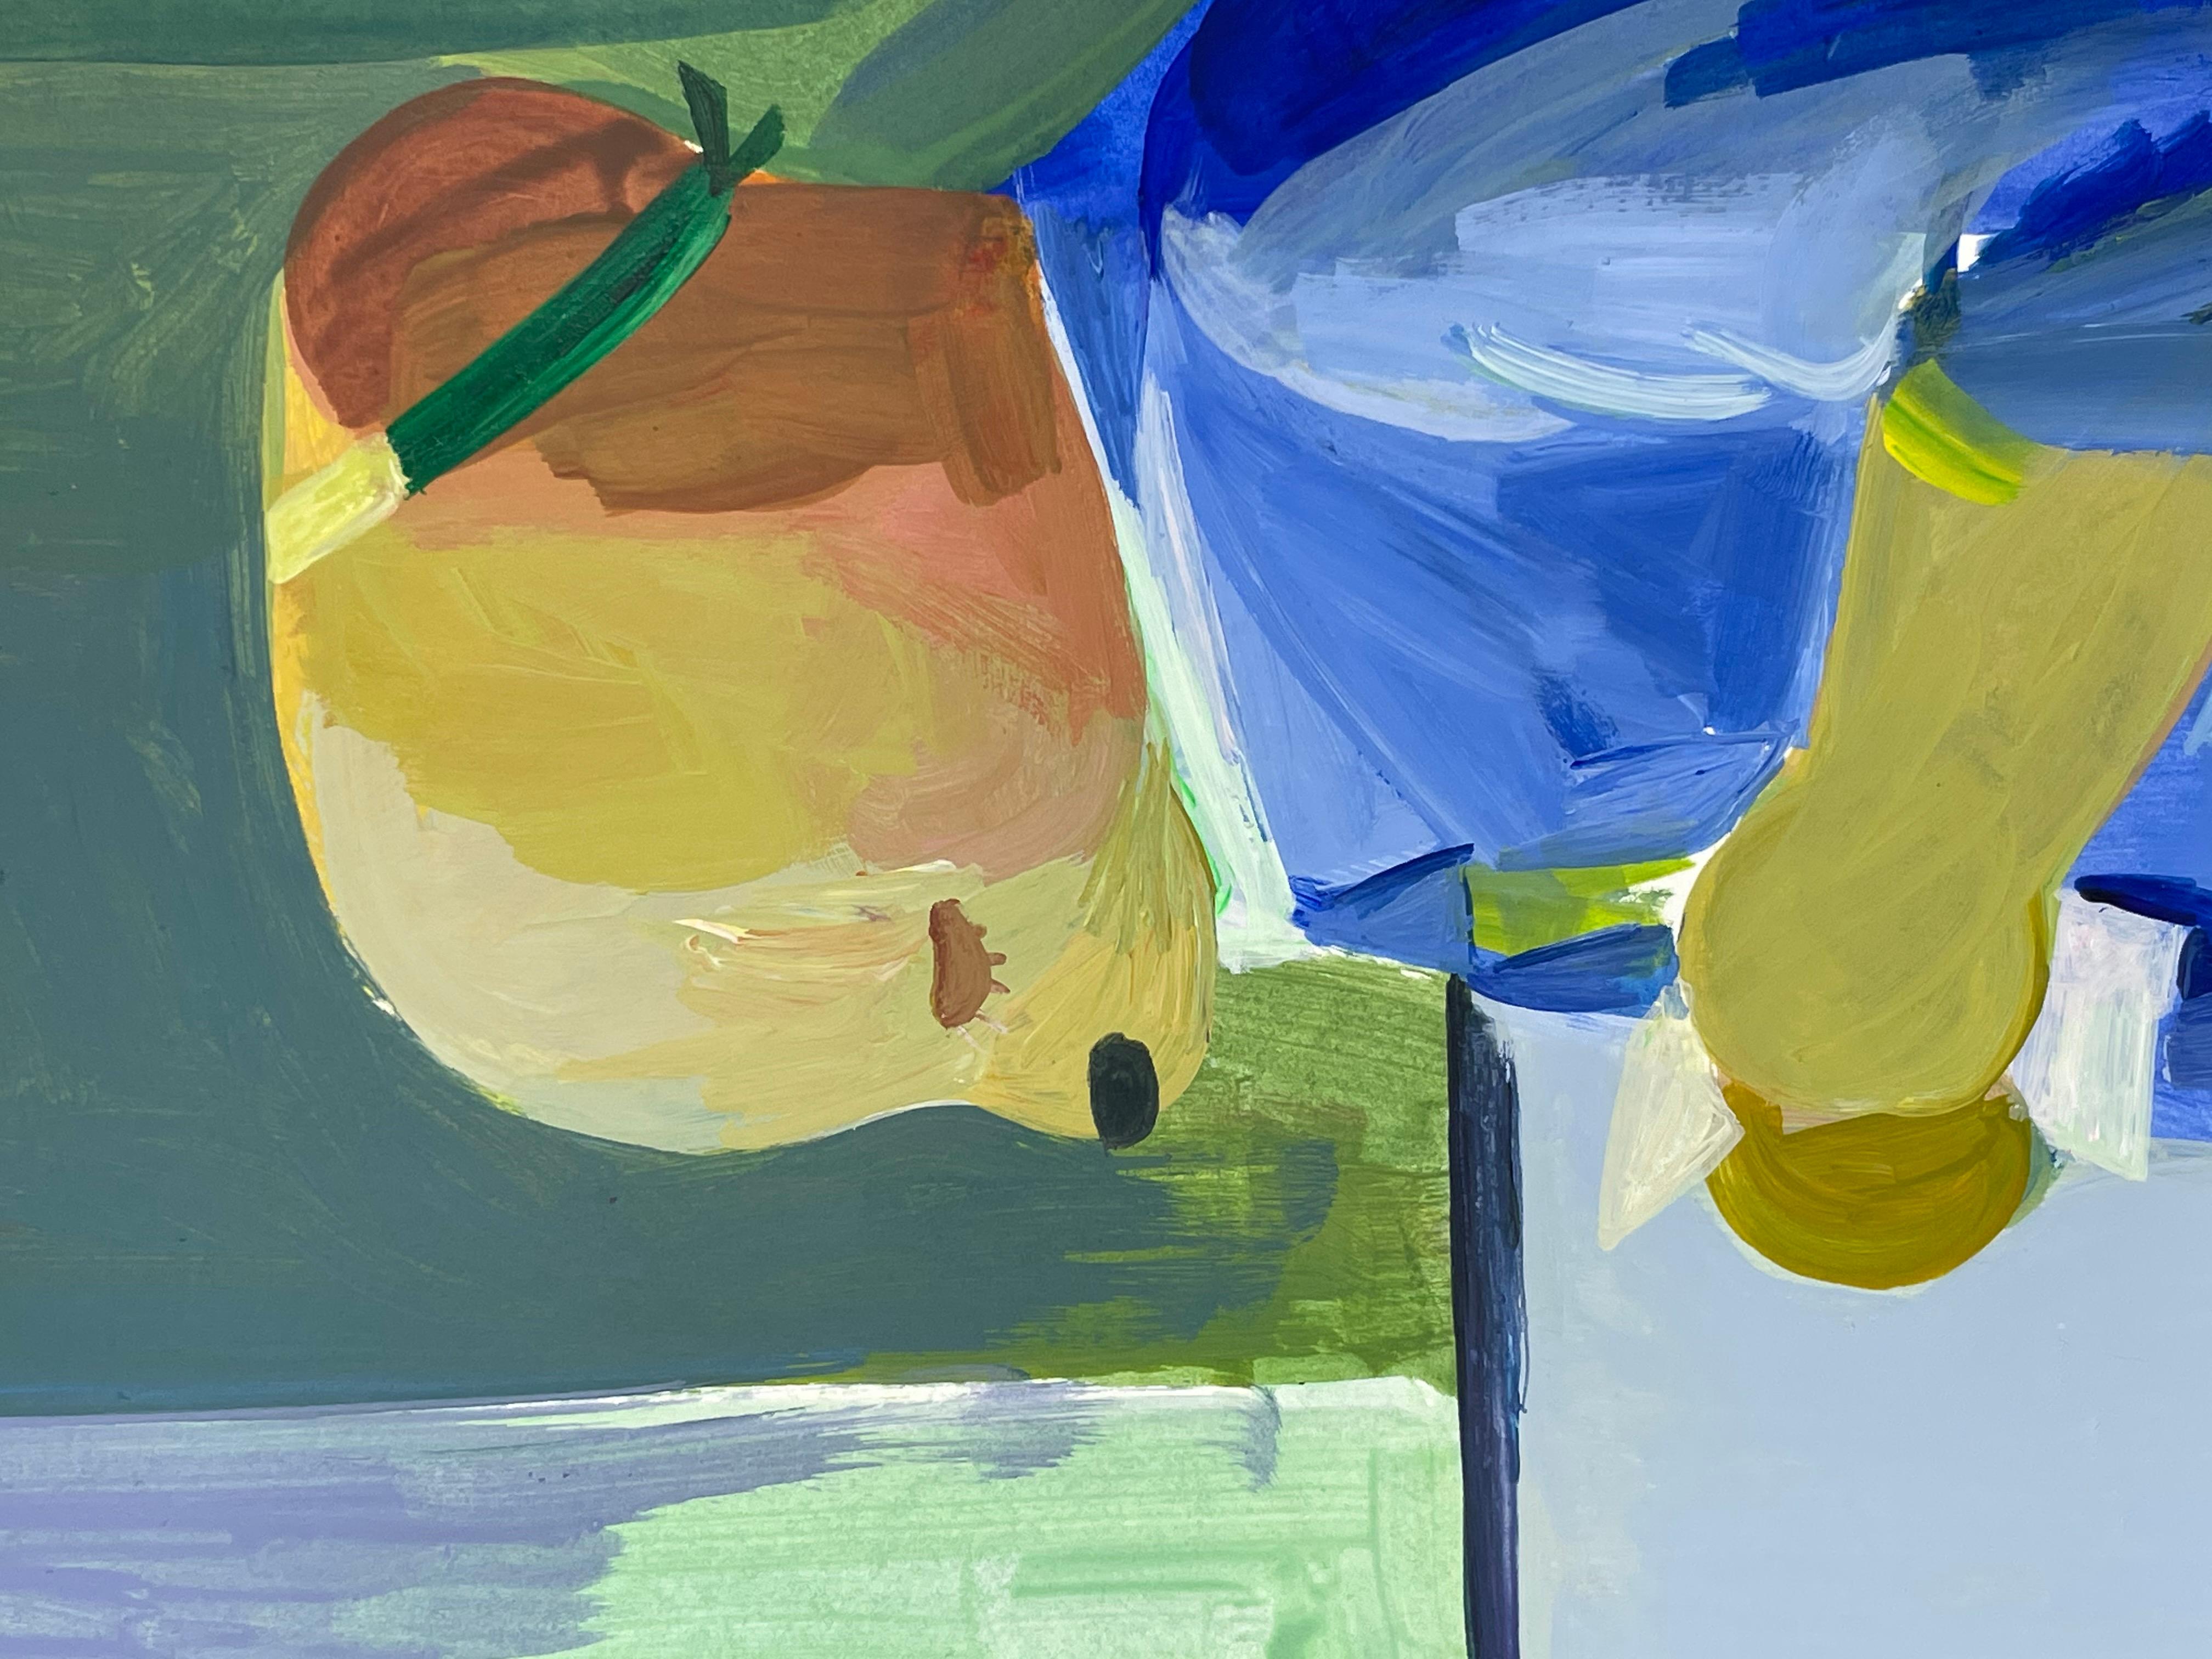 <p>Artist Comments<br />Artist Ziui Vance's paintings commonly reflect on everyday life scenes, encompassing a wide range of domestic contexts. Her depictions of the familiar teddy bear range from working in the home to traditional activities plying